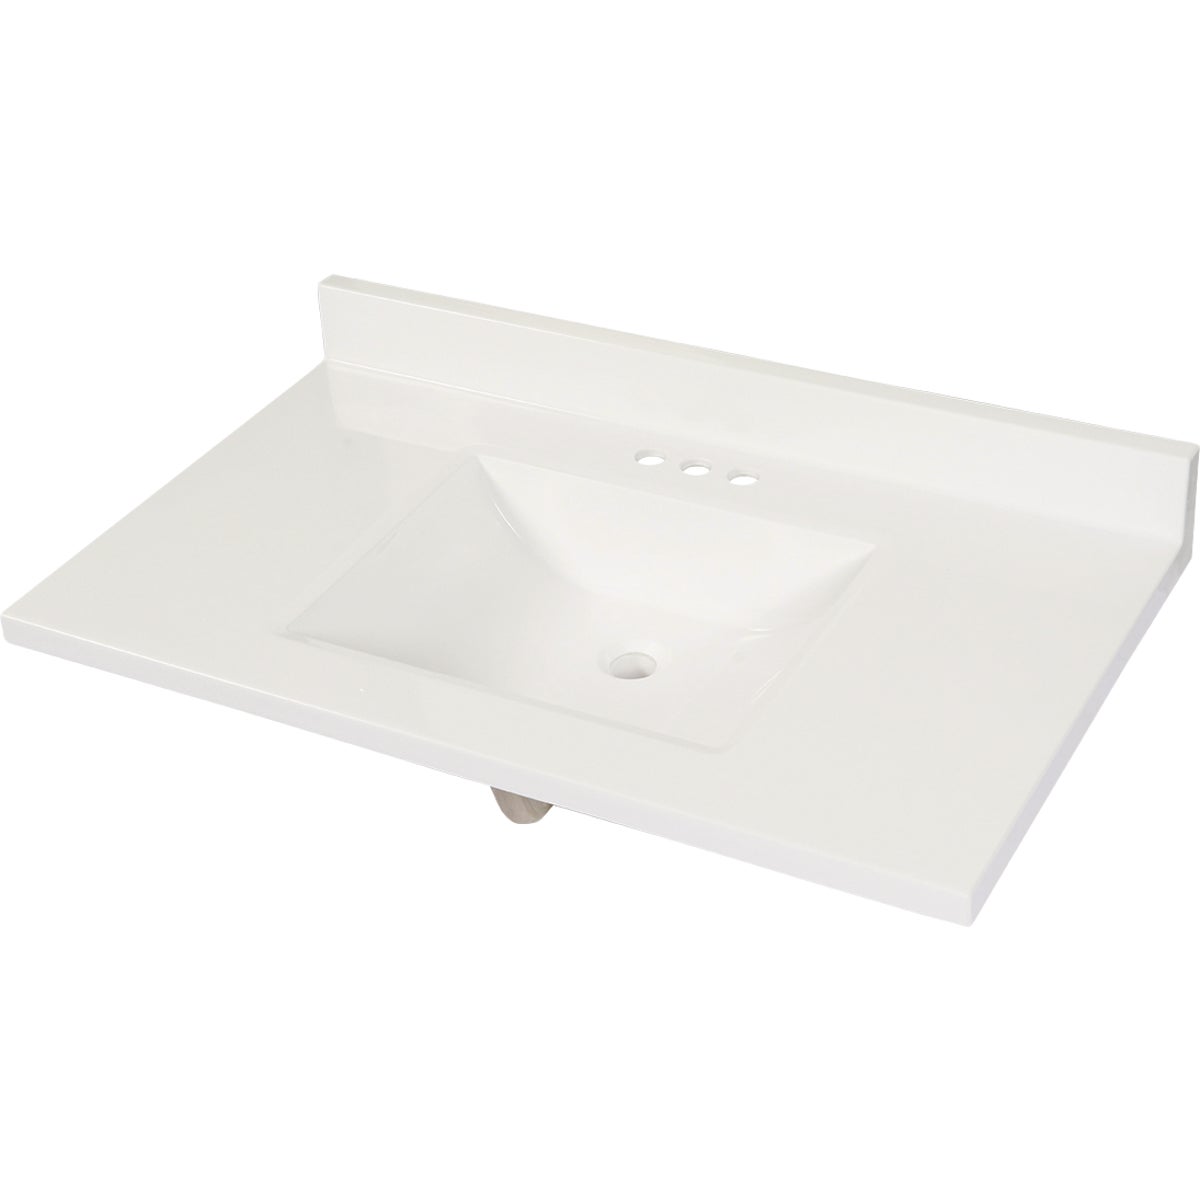 Modular Vanity Tops 37 In. W x 22 In. D Solid White Cultured Marble Vanity Top with Rectangular Wave Bowl